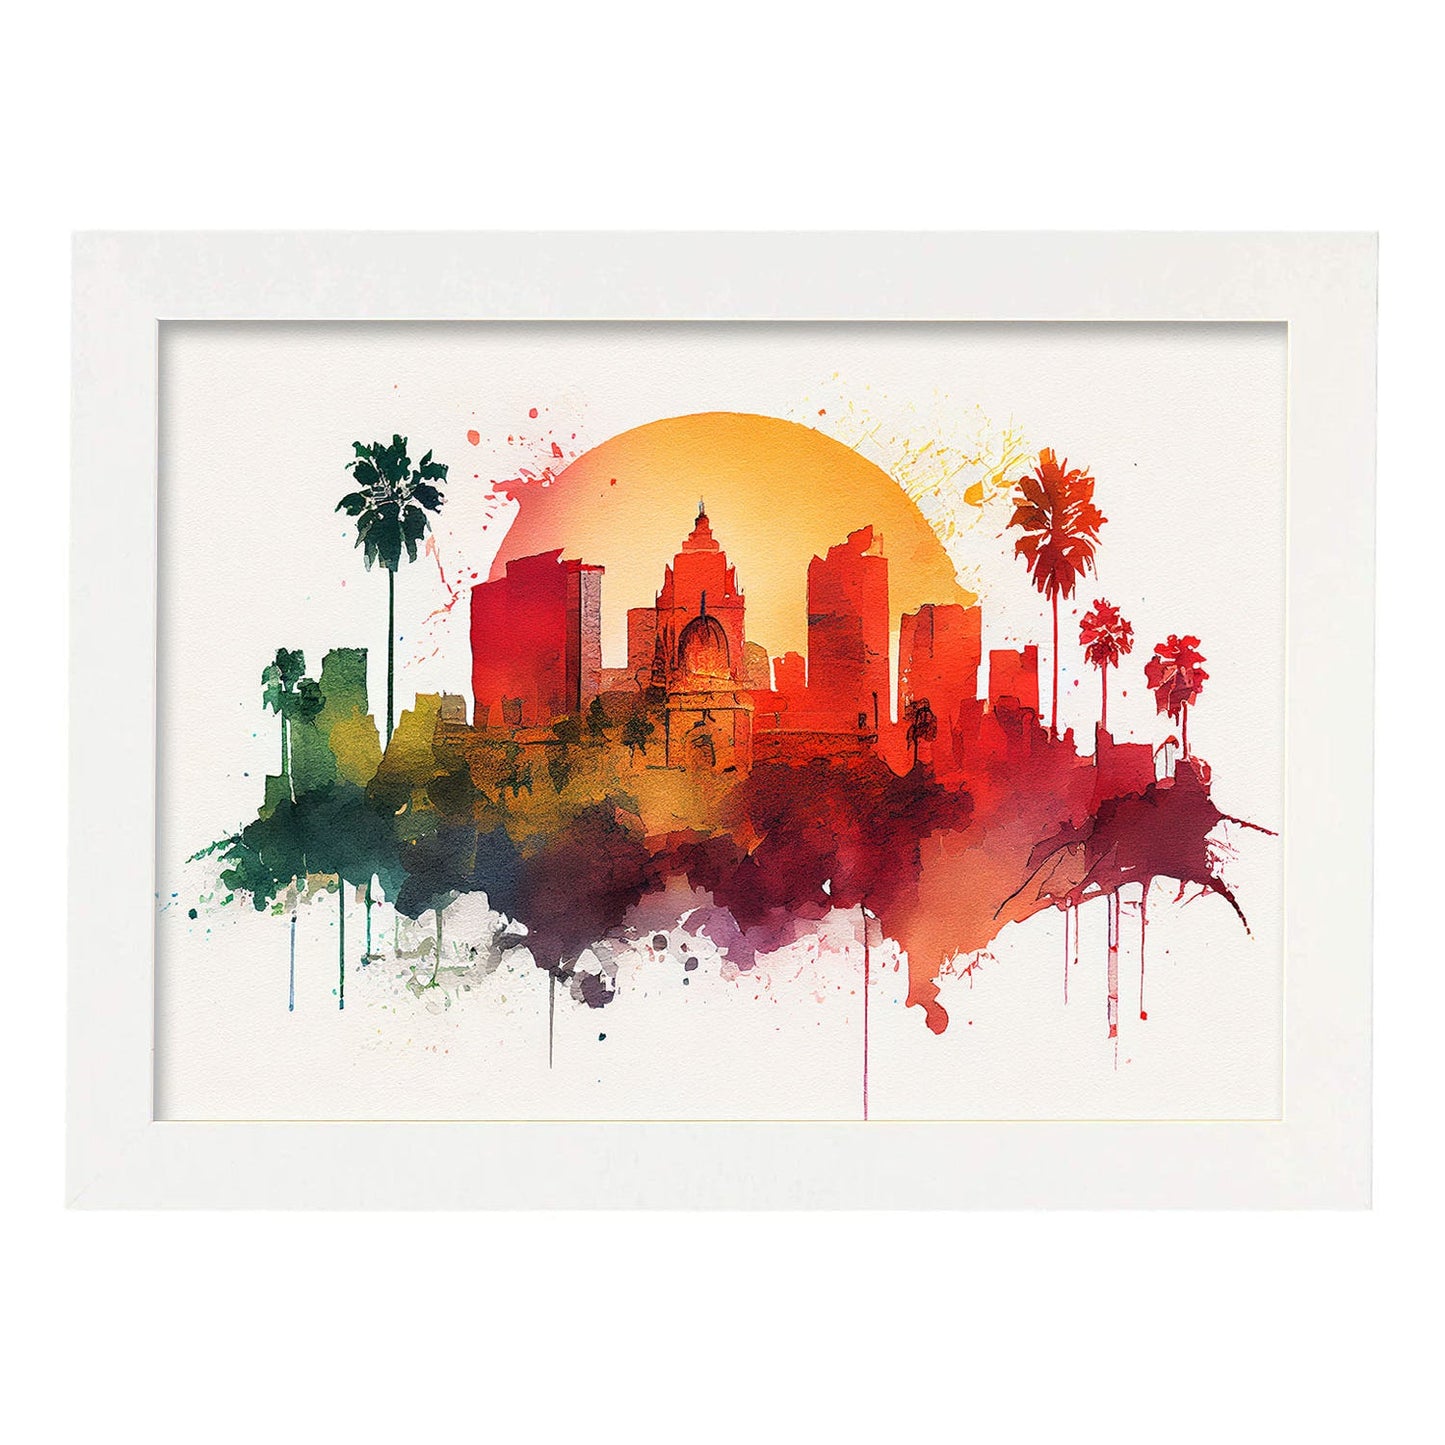 Nacnic watercolor of a skyline of the city of Los Angeles_1. Aesthetic Wall Art Prints for Bedroom or Living Room Design.-Artwork-Nacnic-A4-Marco Blanco-Nacnic Estudio SL